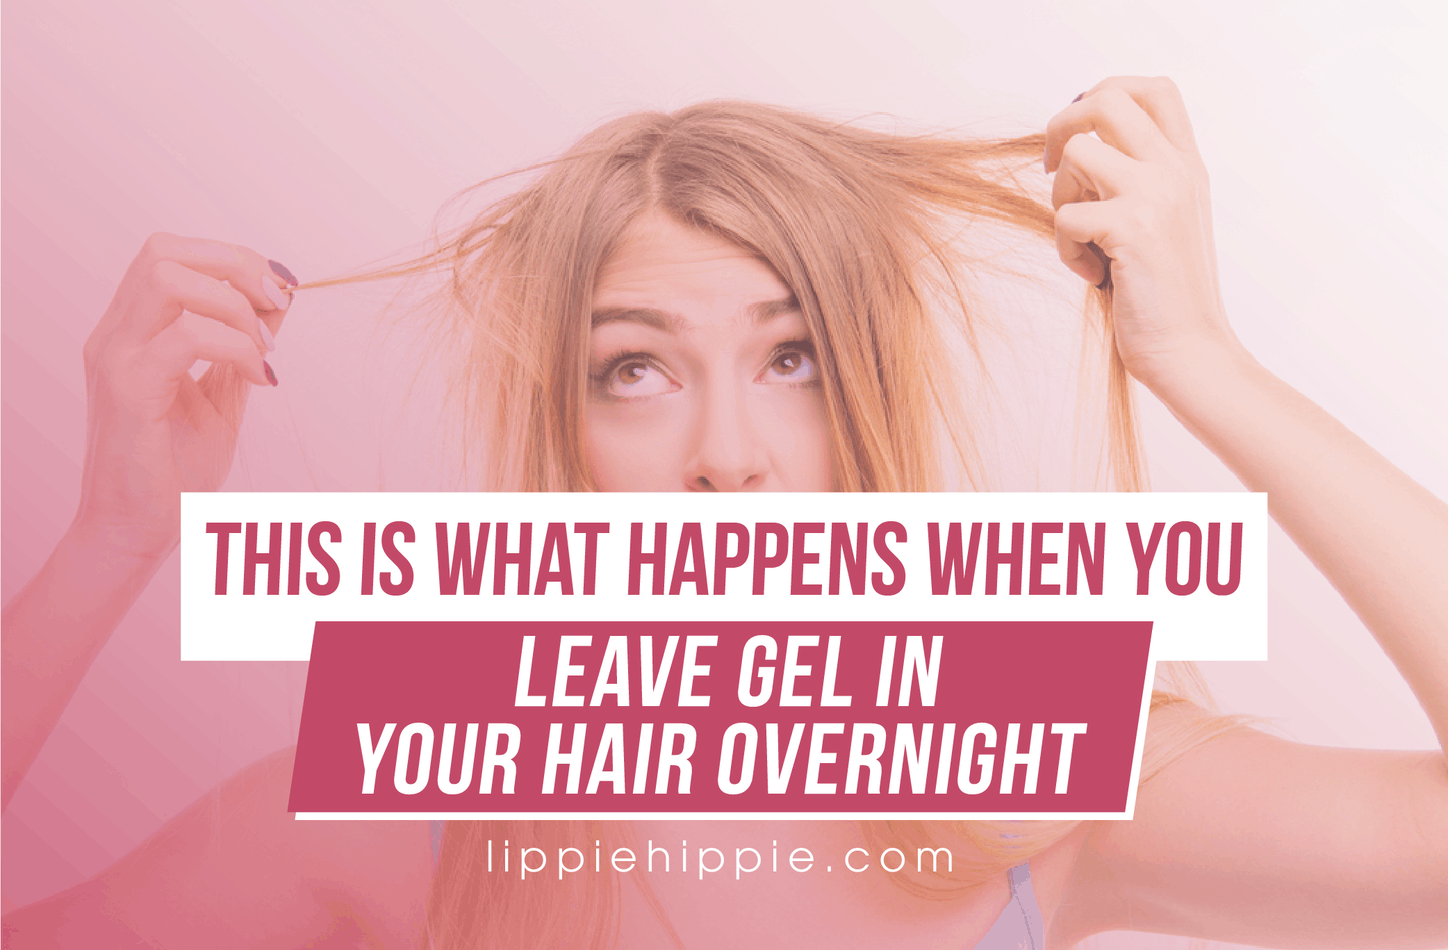 This Is What Happens When You Leave Gel In Your Hair Overnight